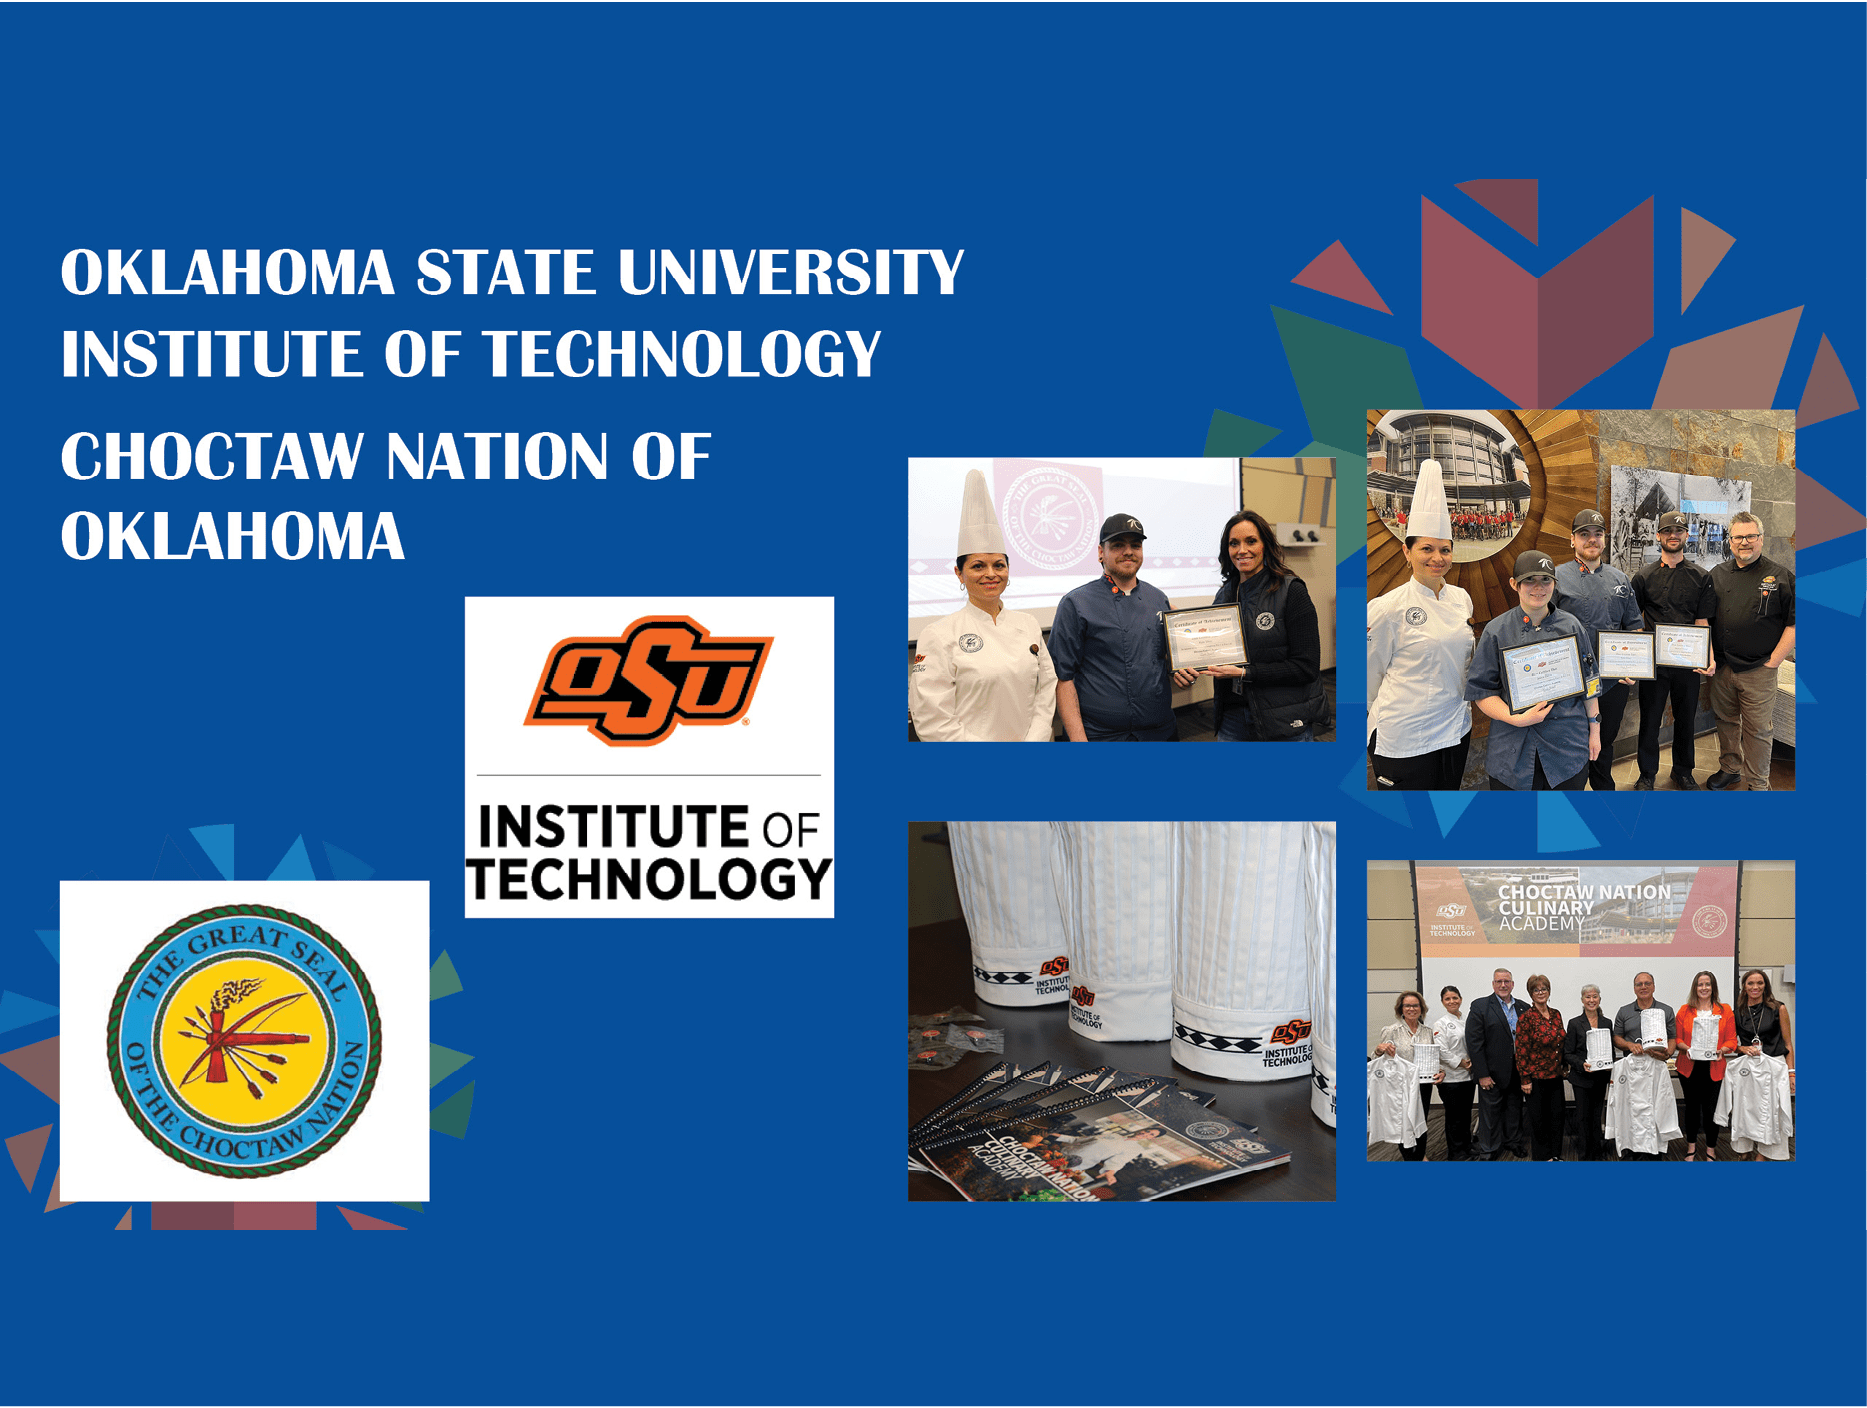 Oklahoma State University Institute of Technology and Choctaw Nation of Oklahoma